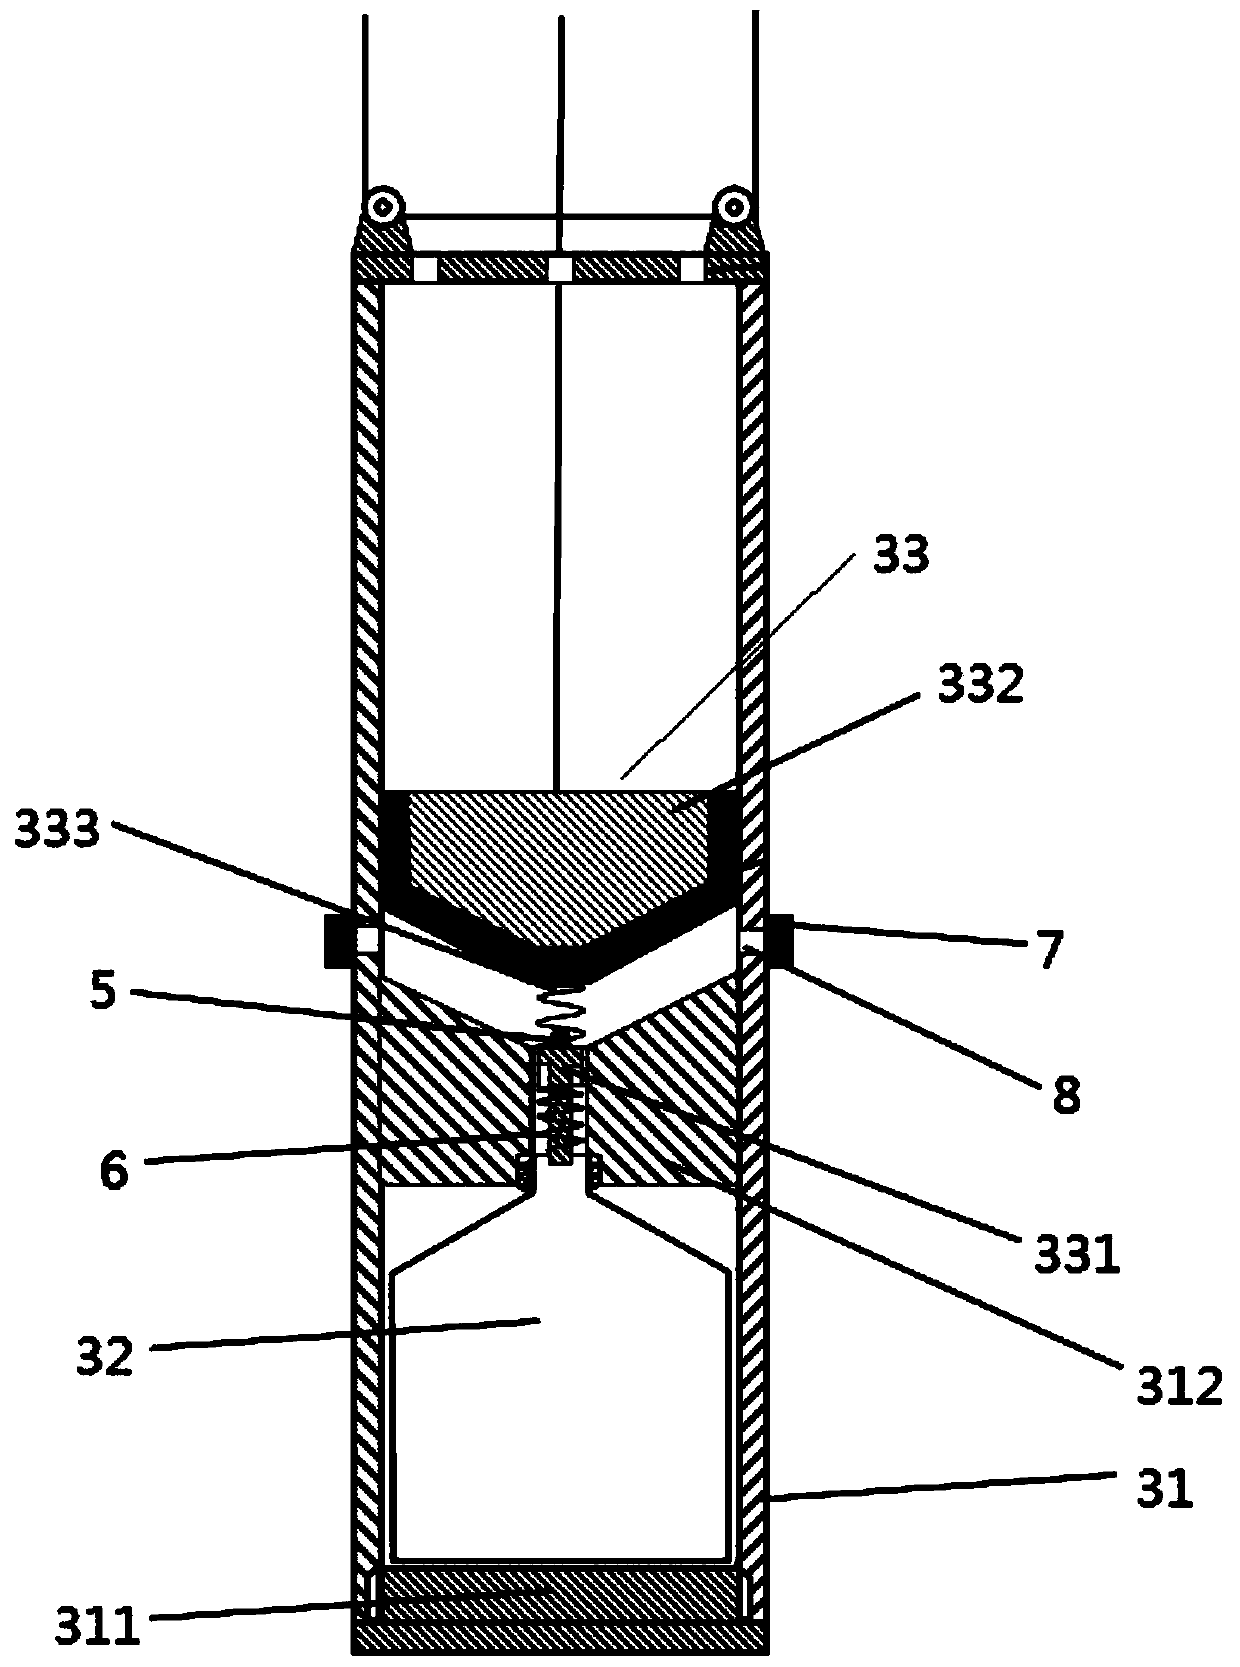 High-fidelity depthkeeping water sample acquisition device